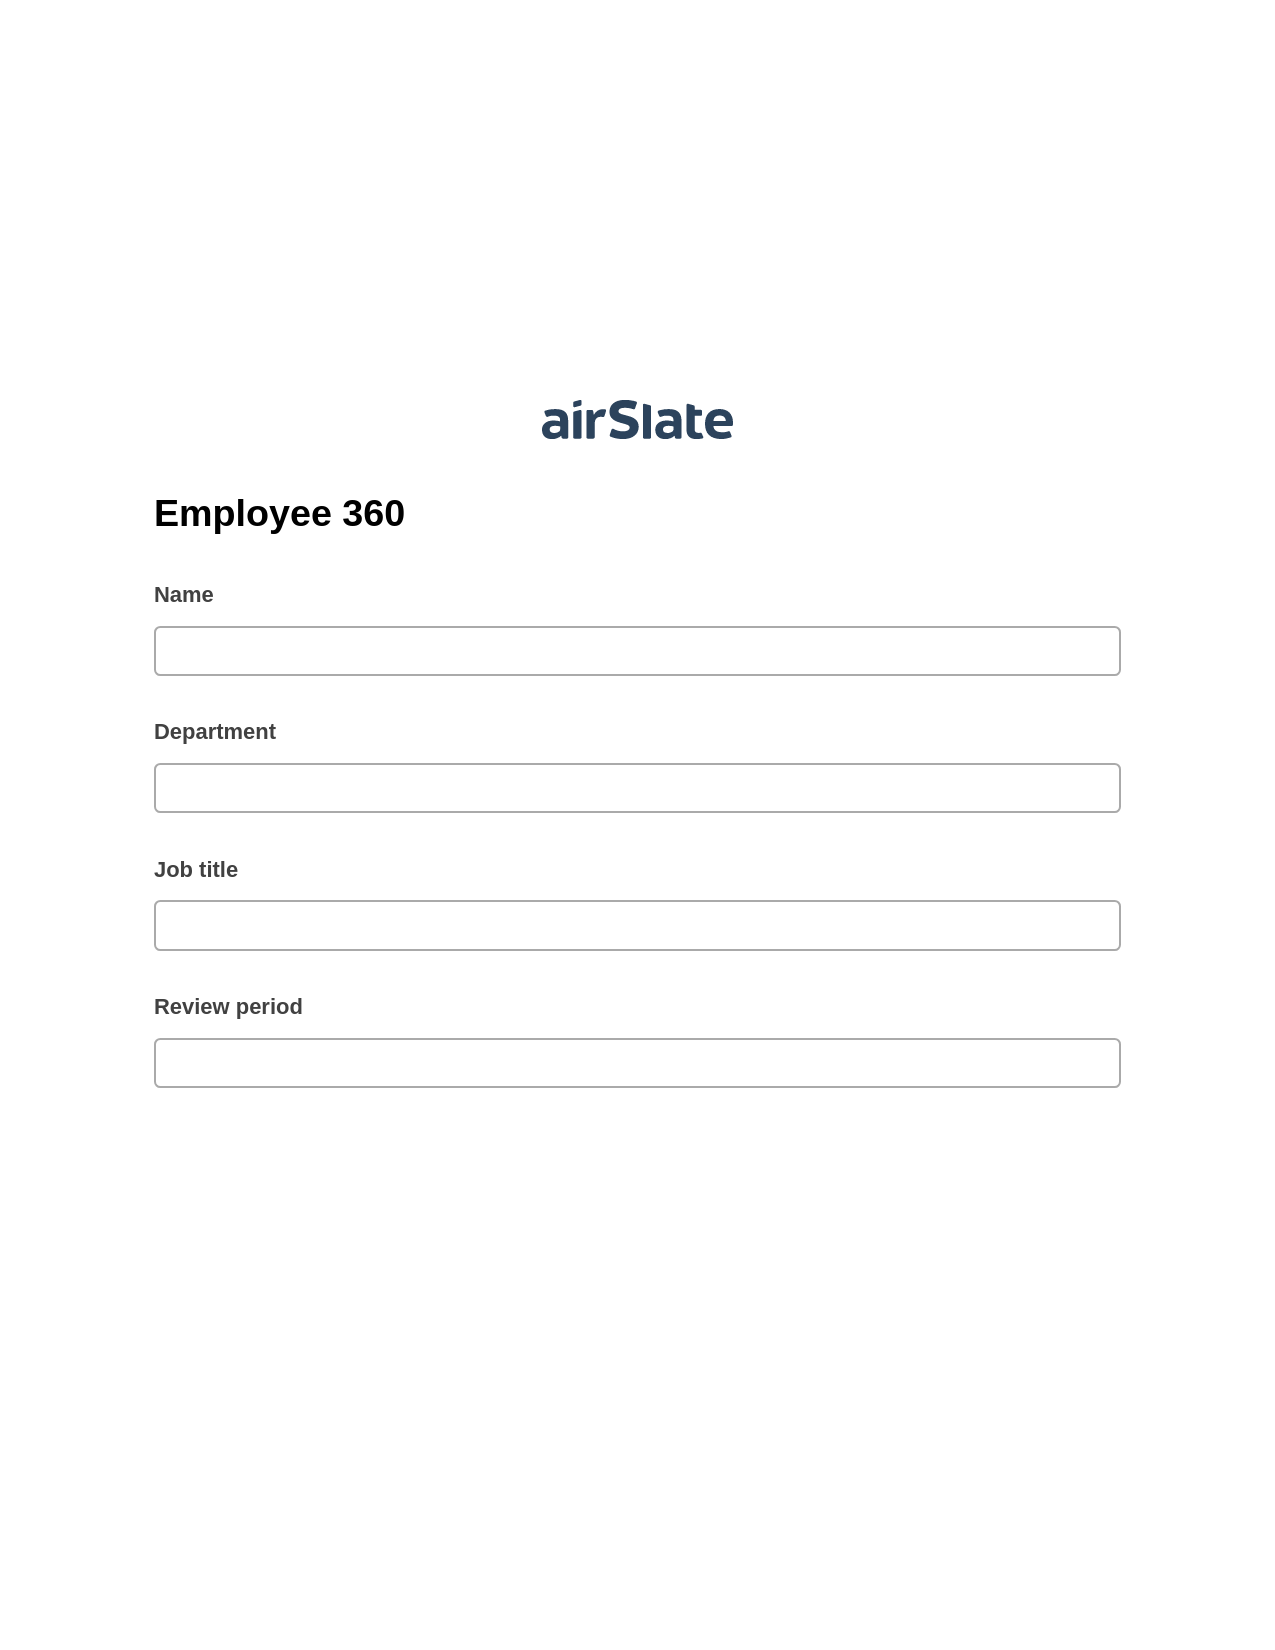 Multirole Employee 360 Pre-fill from Google Sheets Bot, Update MS Dynamics 365 Record Bot, Export to MySQL Bot